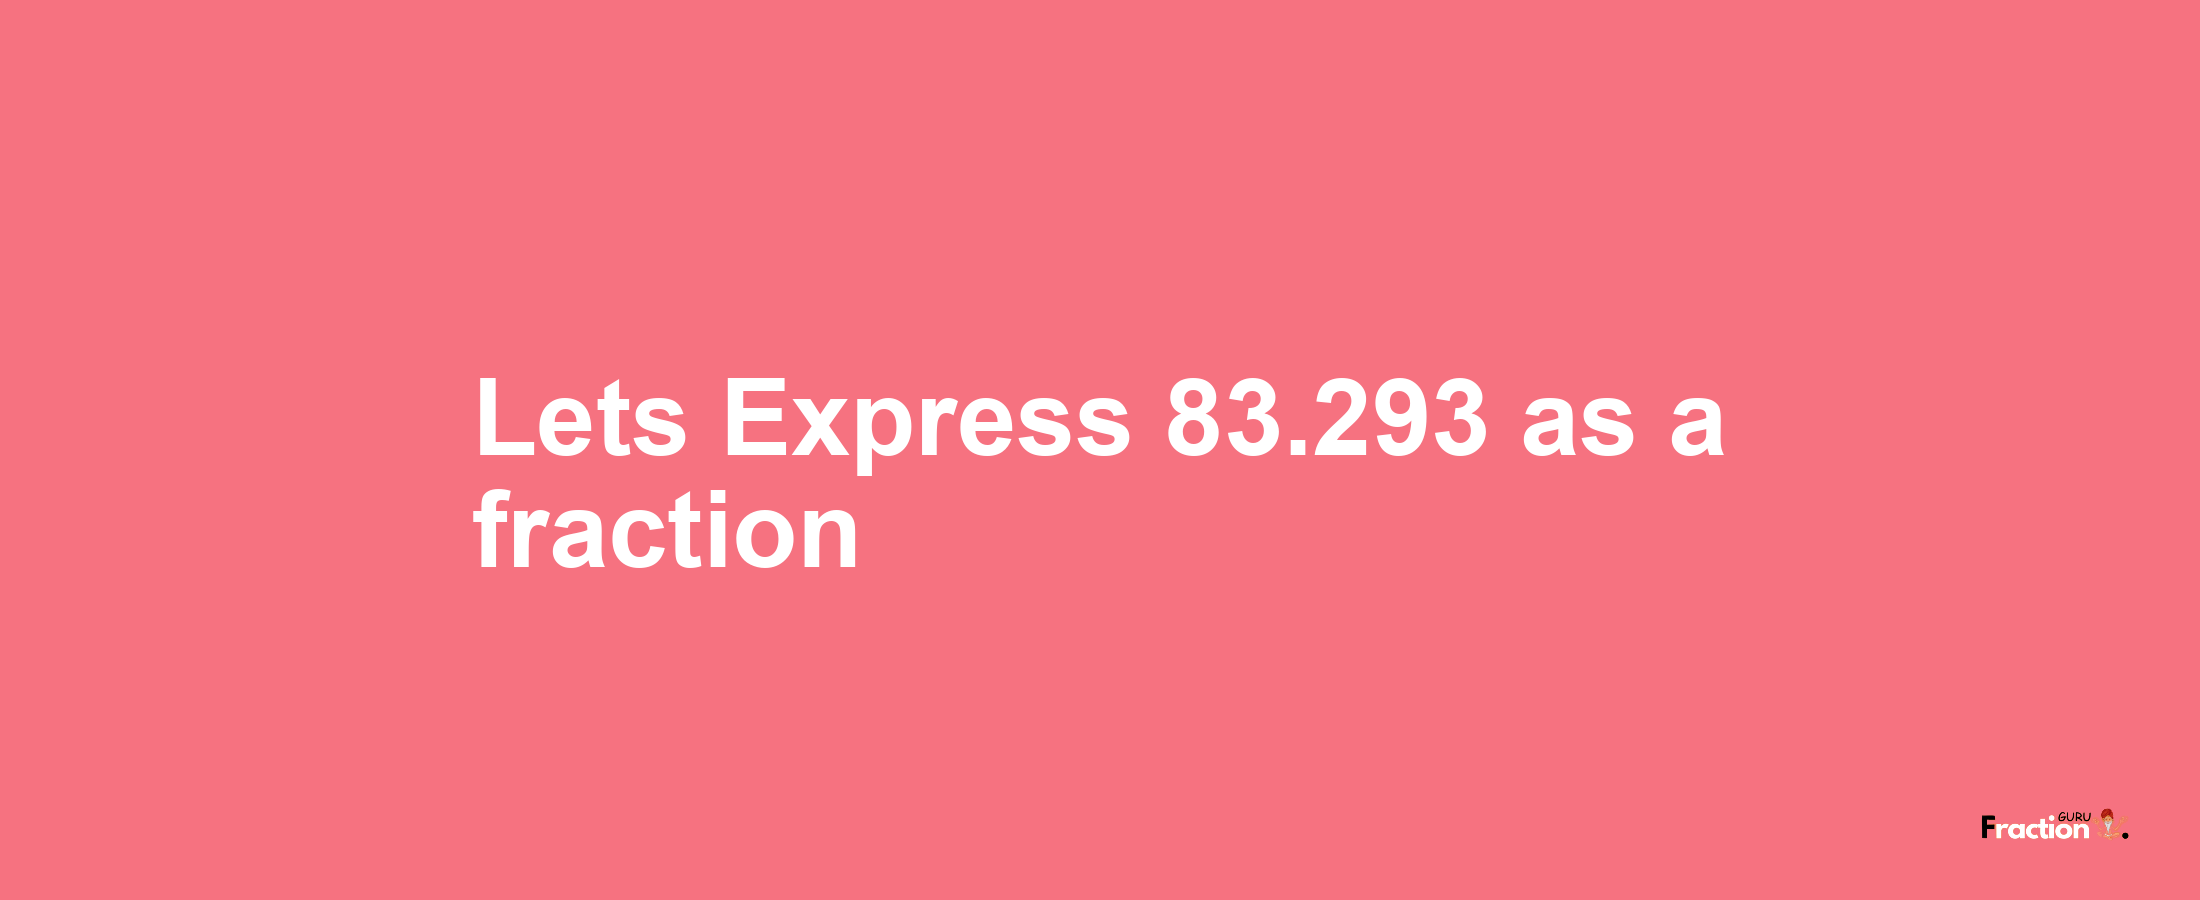 Lets Express 83.293 as afraction